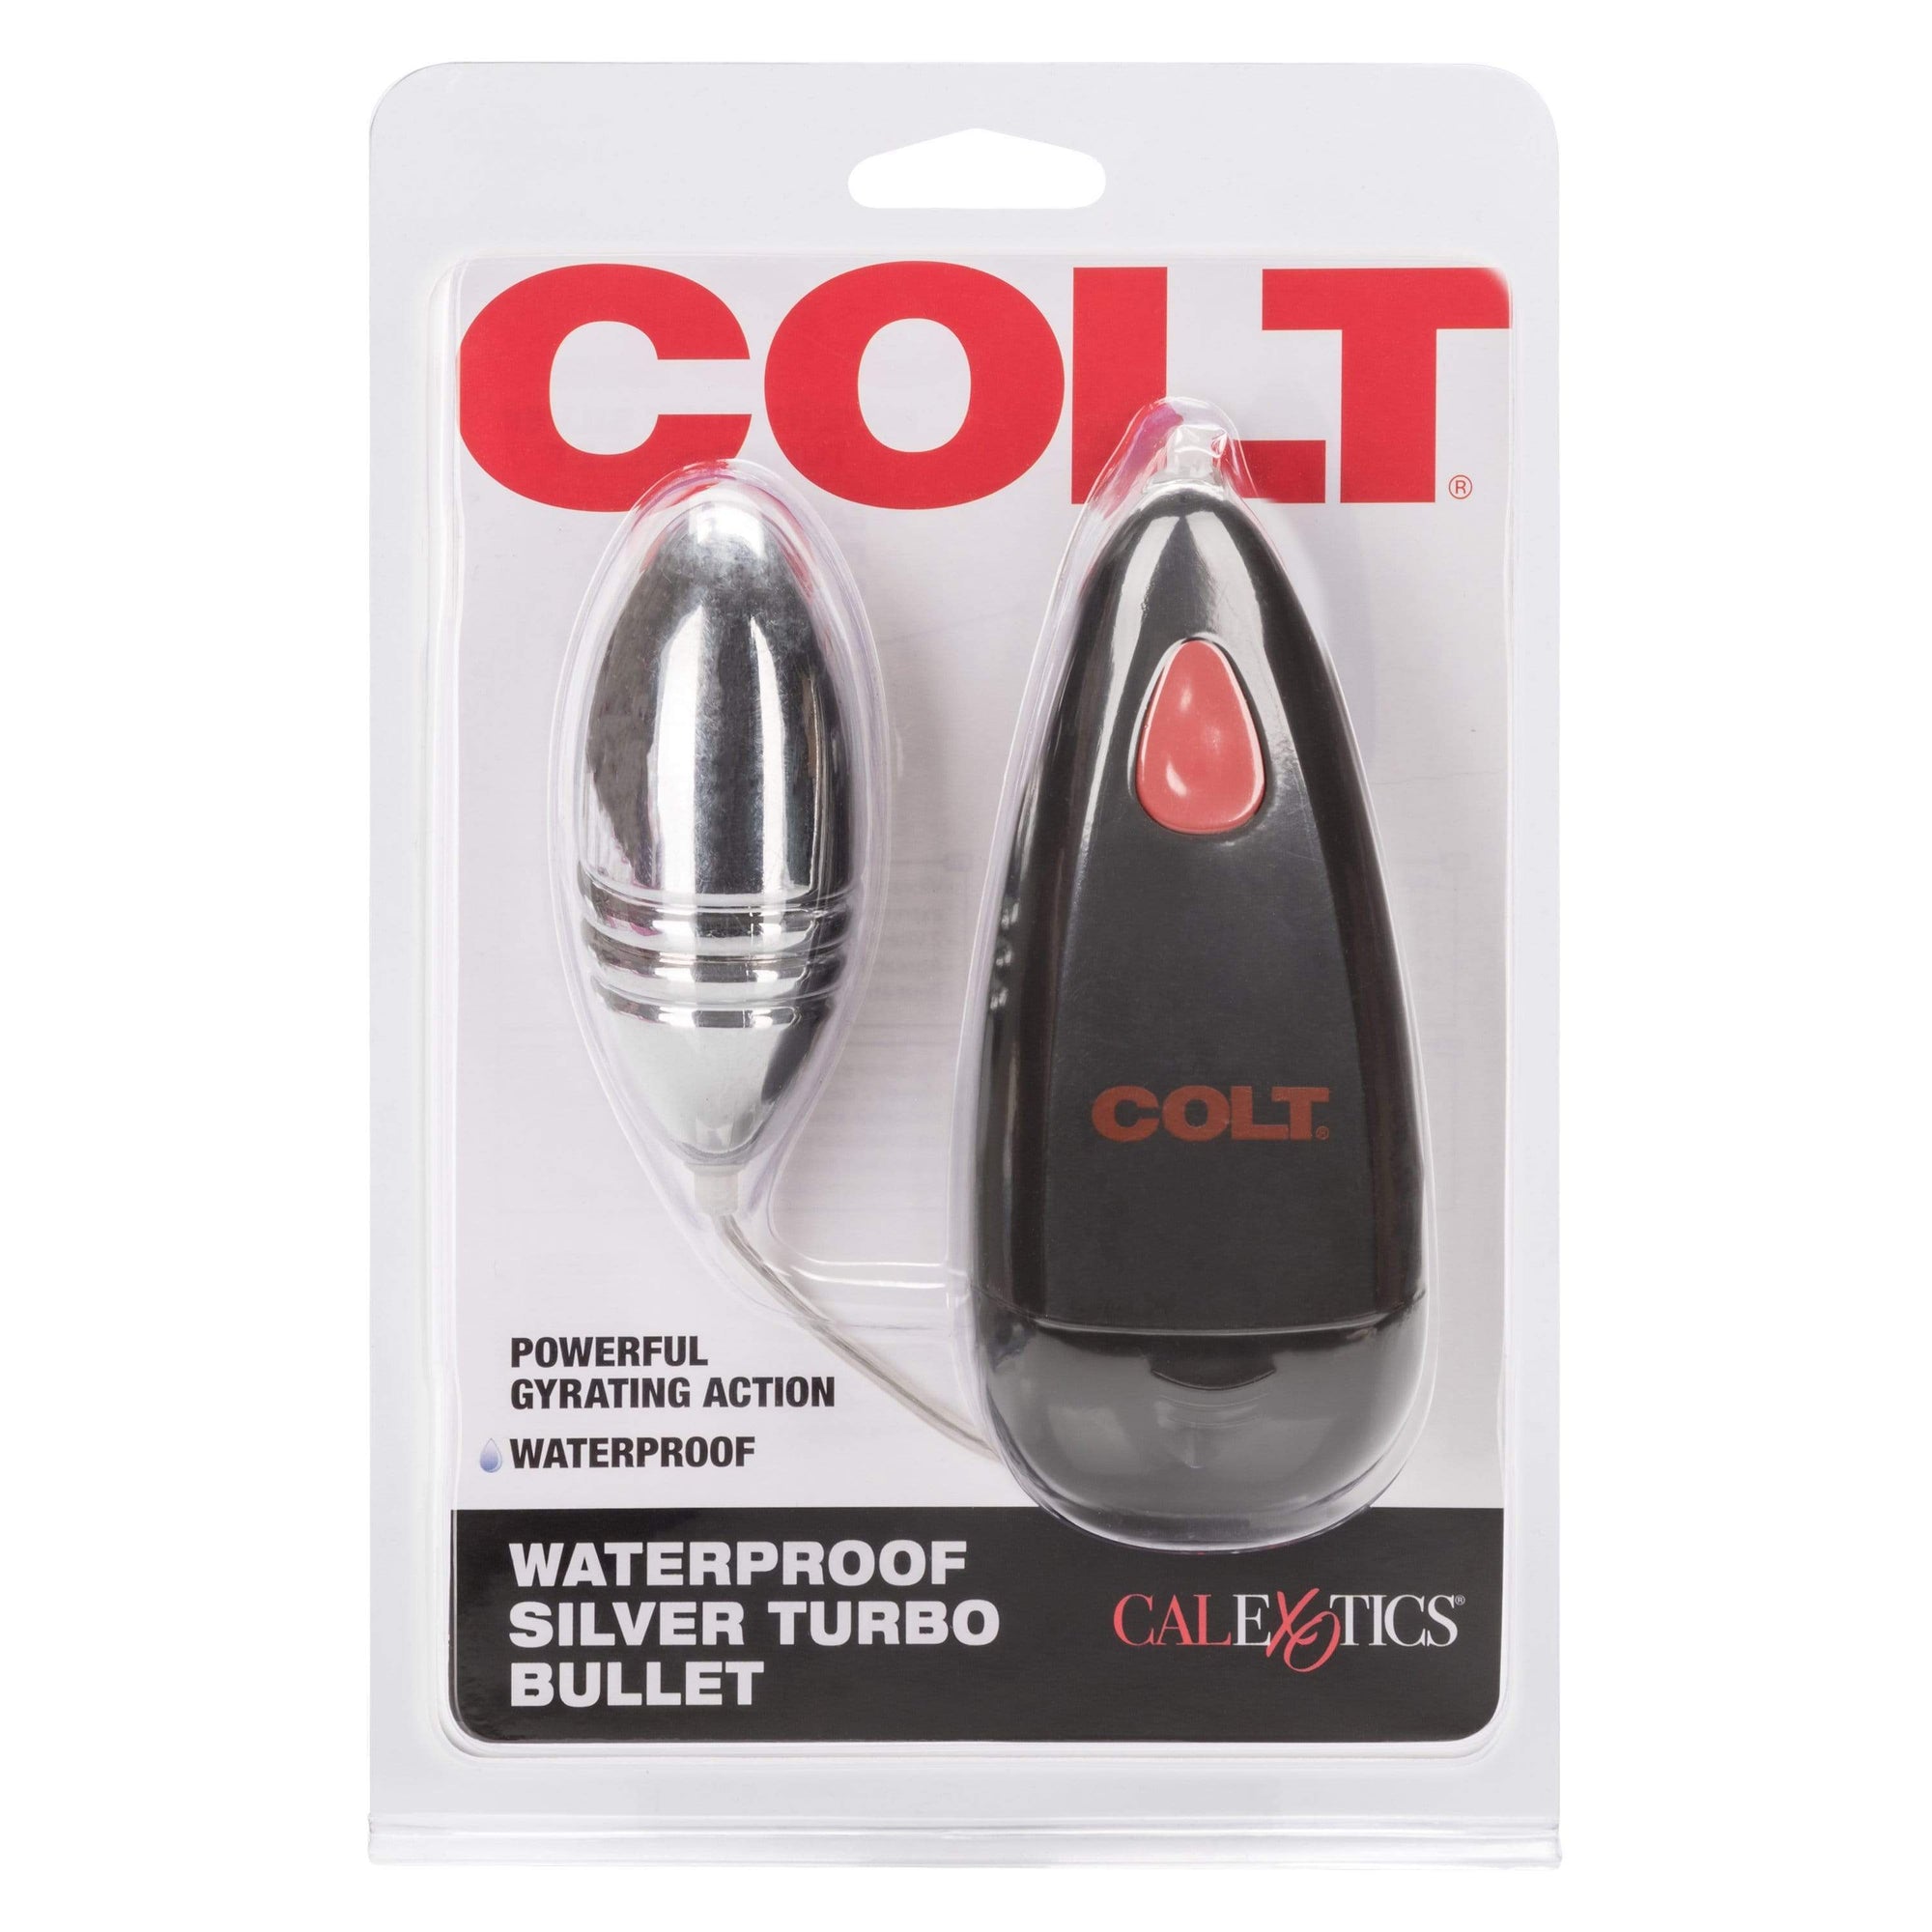 California Exotics - COLT Waterproof Silver Turbo Bullet Vibrator with Remote (Silver) Wired Remote Control Egg (Vibration) Non Rechargeable 716770089113 CherryAffairs